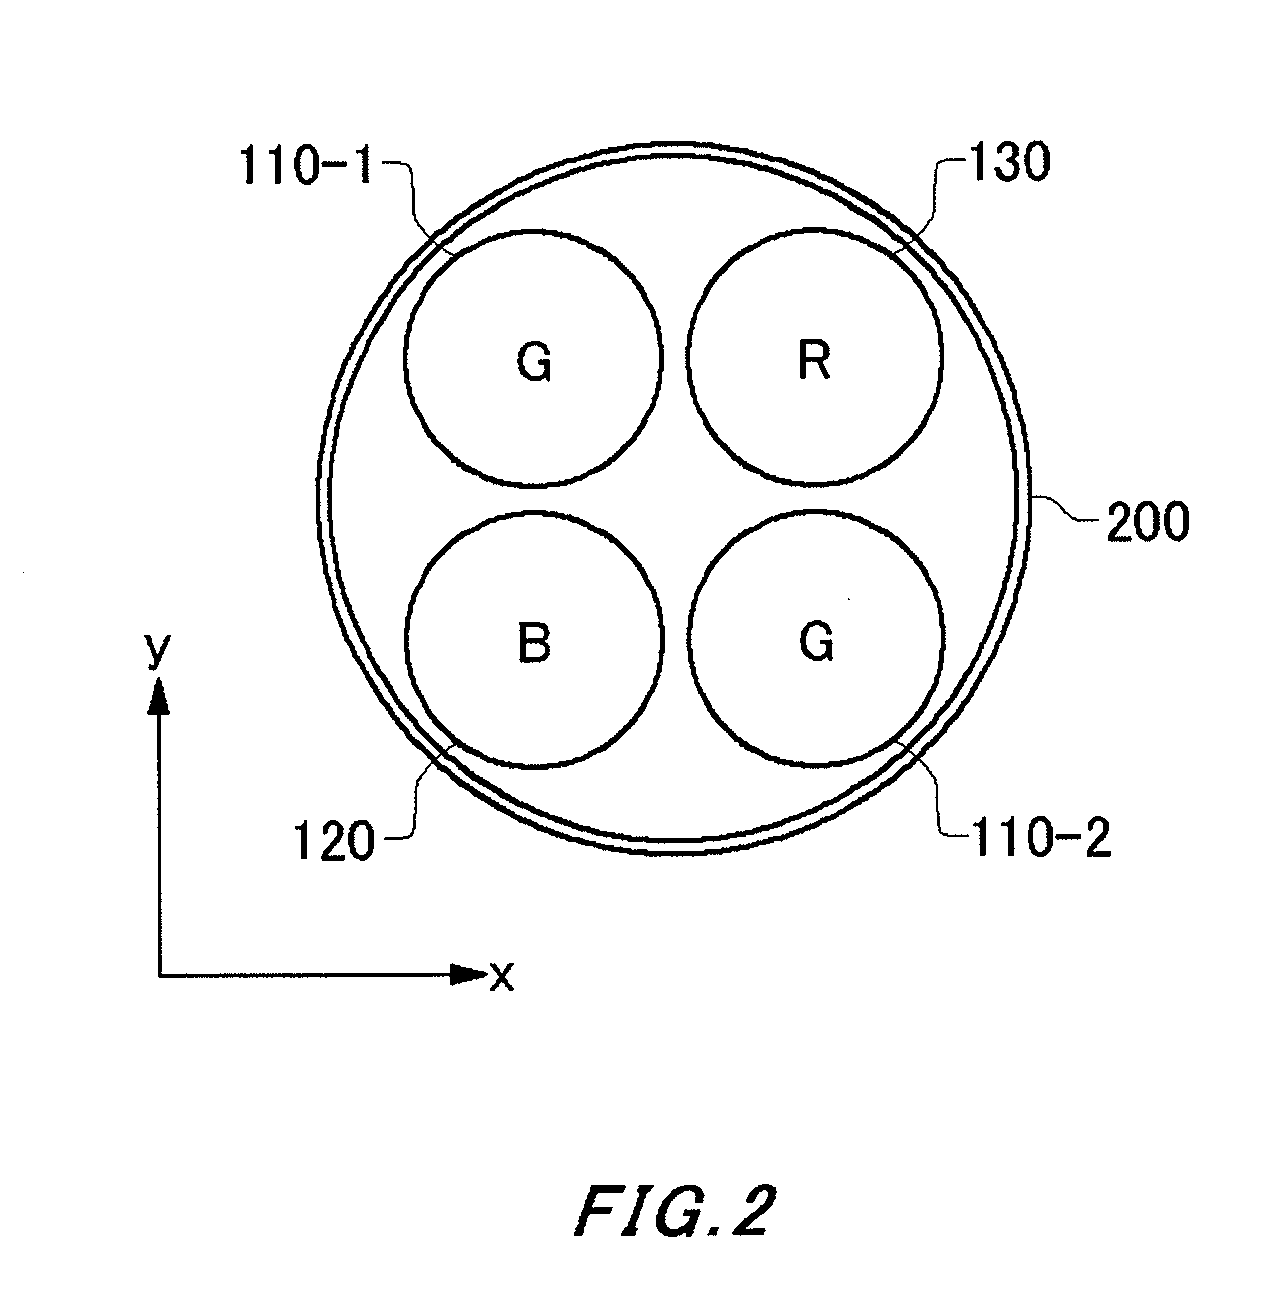 Image capturing module and image capturing apparatus